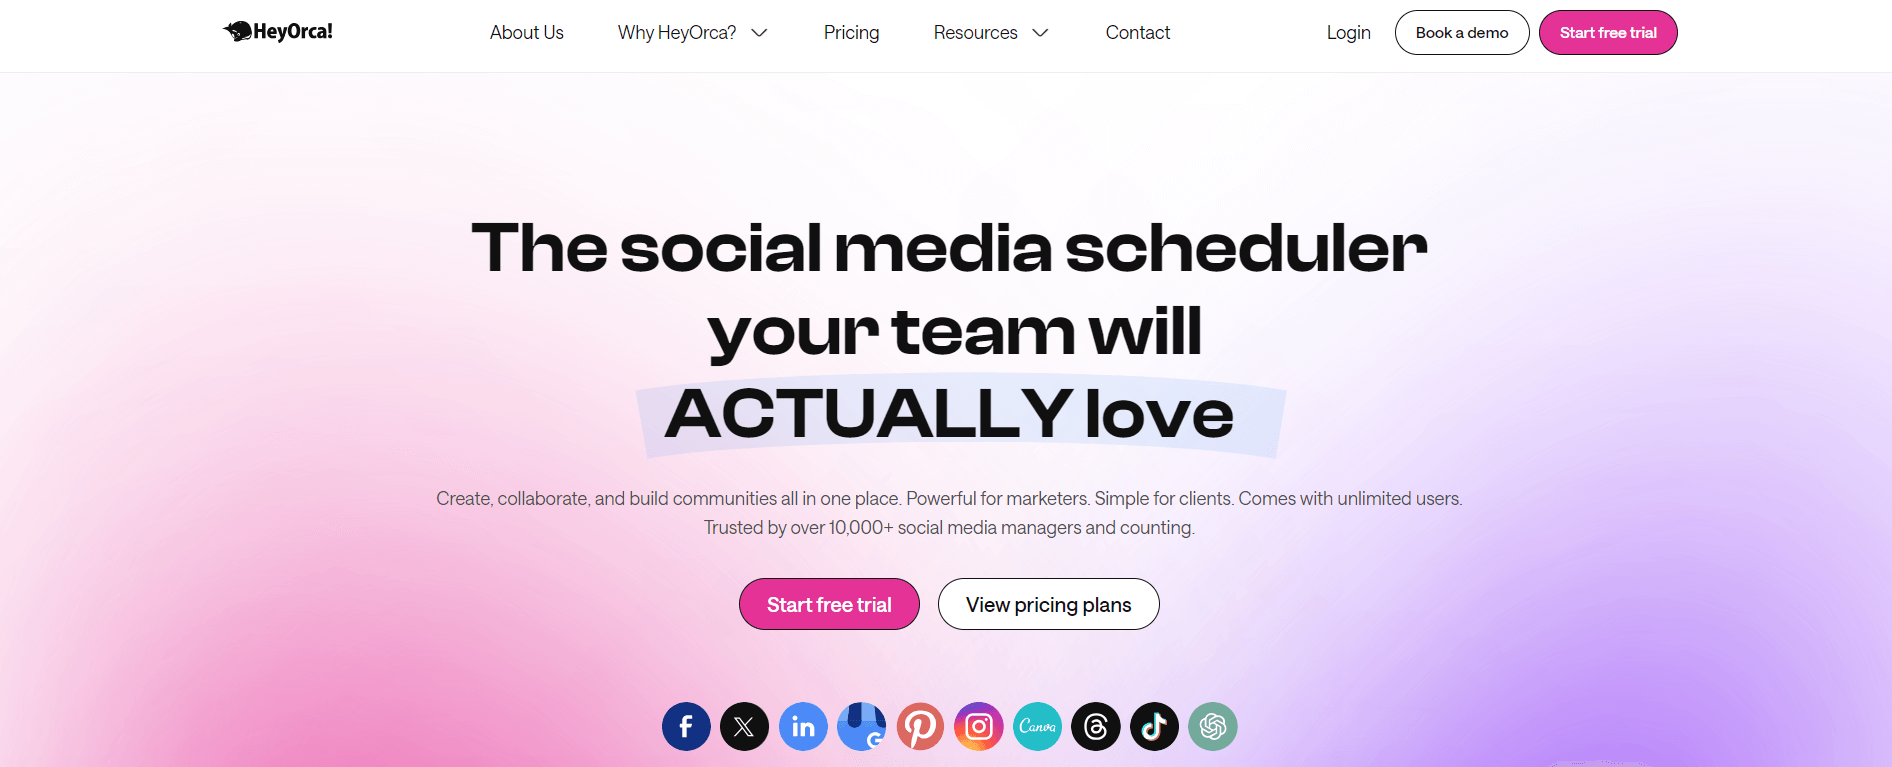 HeyOrca's homepage having a pink gradient background with a title: "The social media scheduler your team will ACTUALLY love," with buttons for "Start free trial" and "View pricing plans."